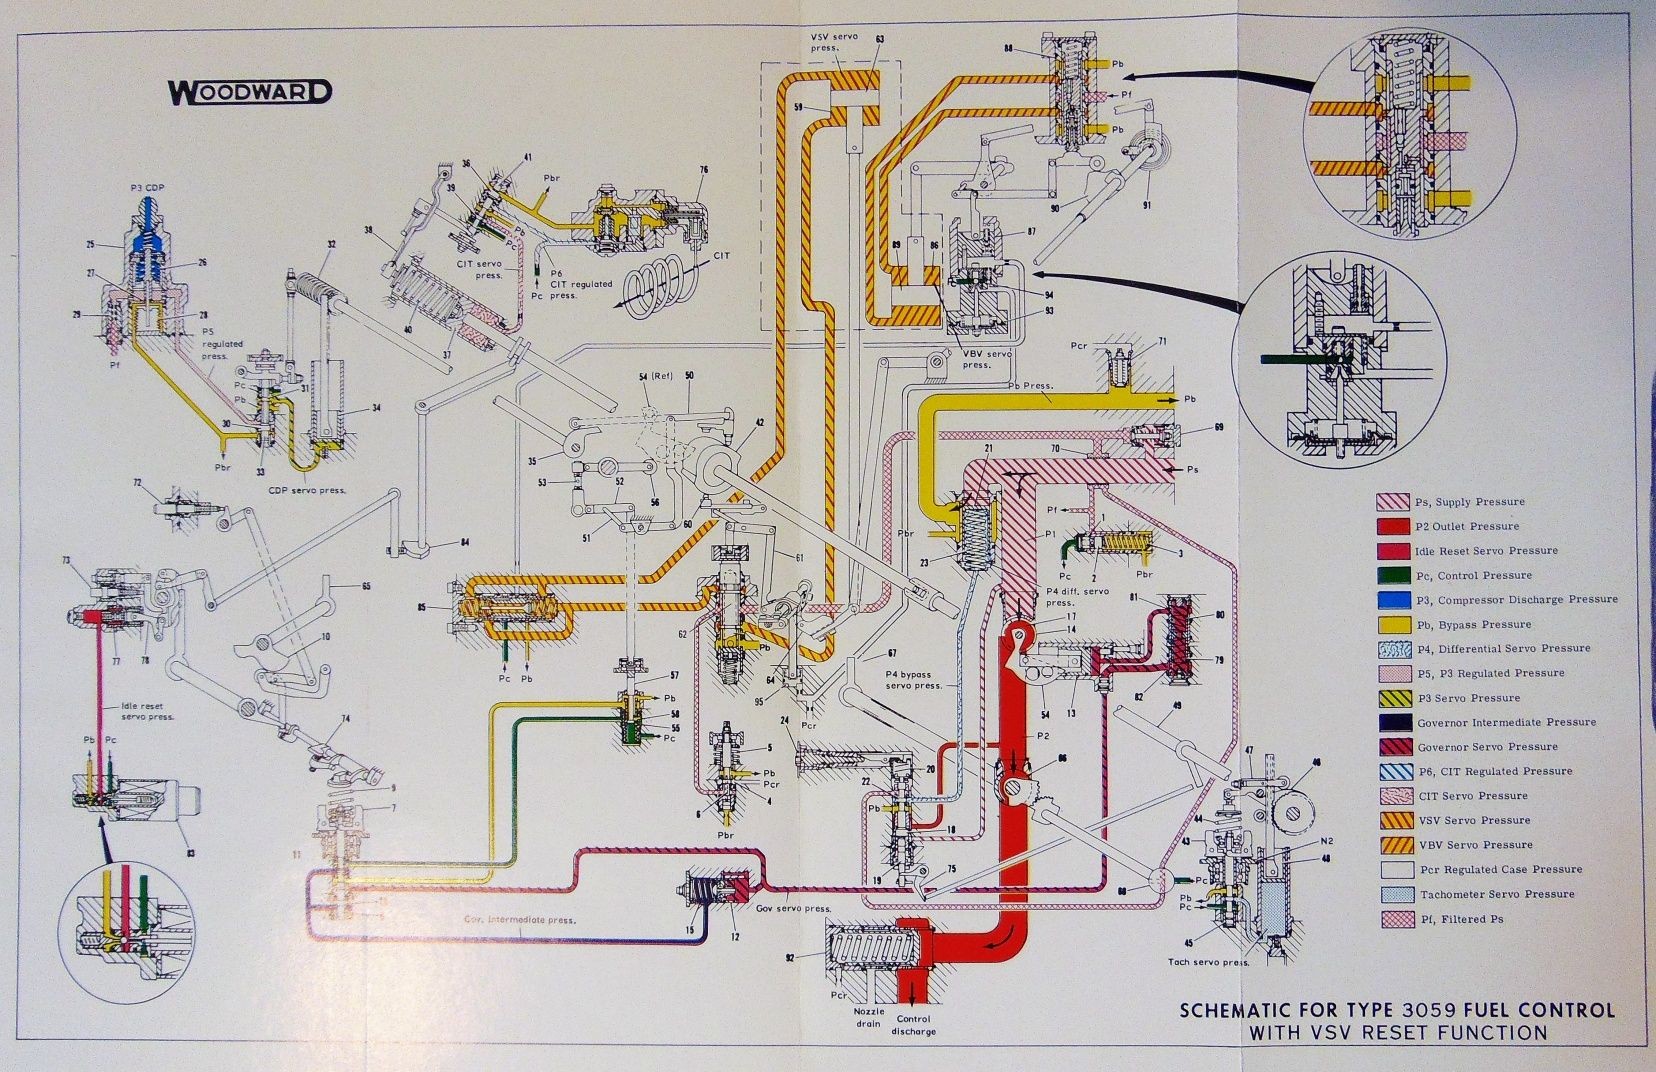 Woodward MEC schematic for the jet engine Woodward MEC schematic for the jet engine